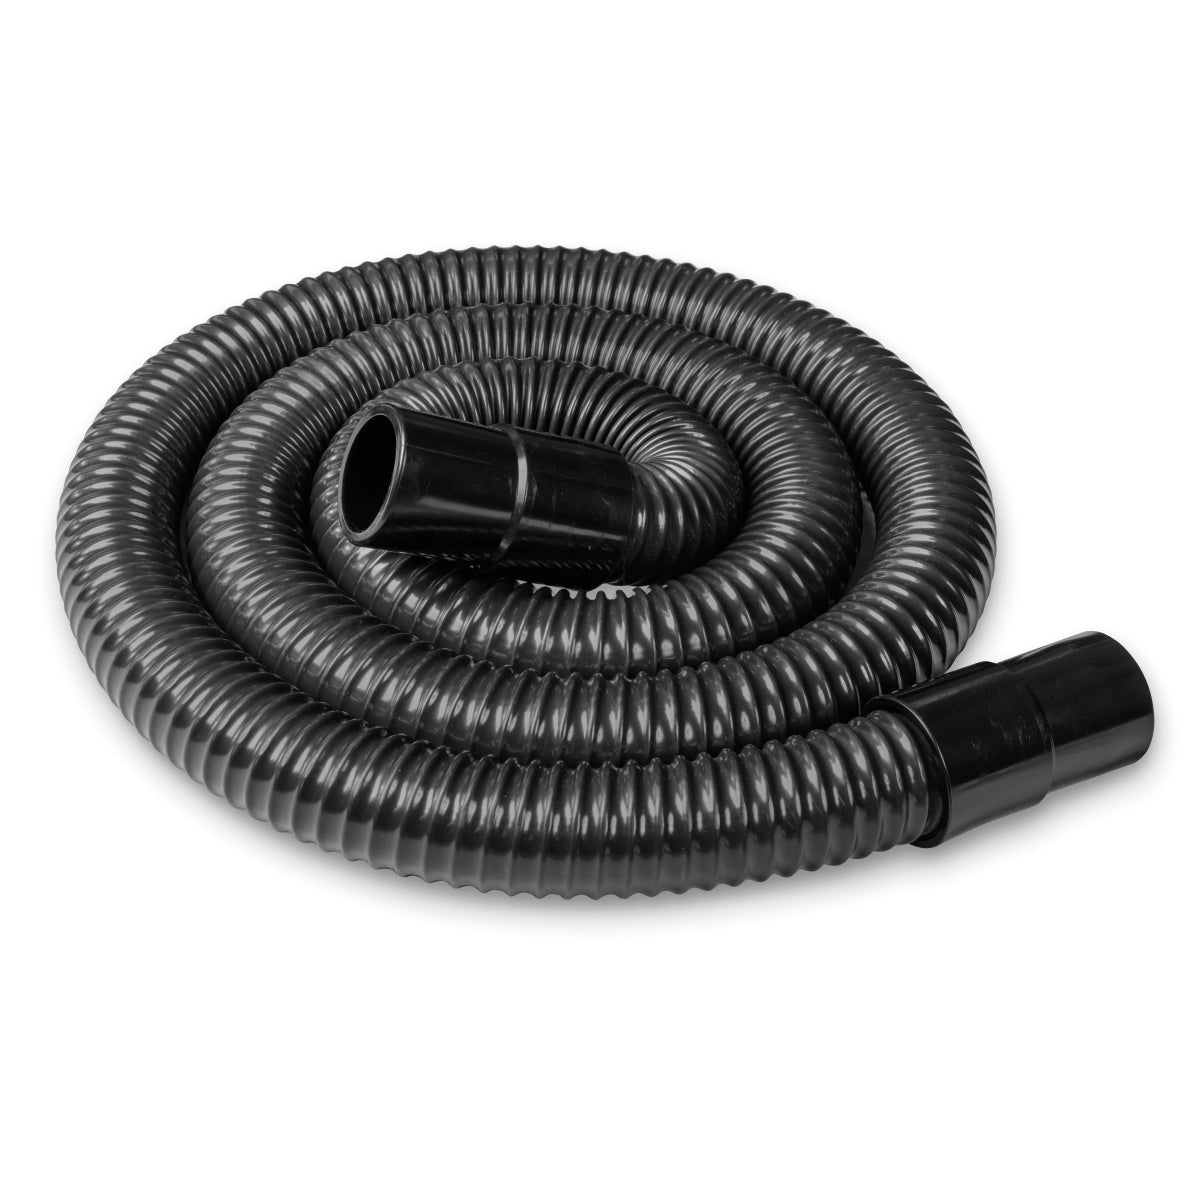 Miller Filtair 130 (34-ft) Collection Hose (300897)